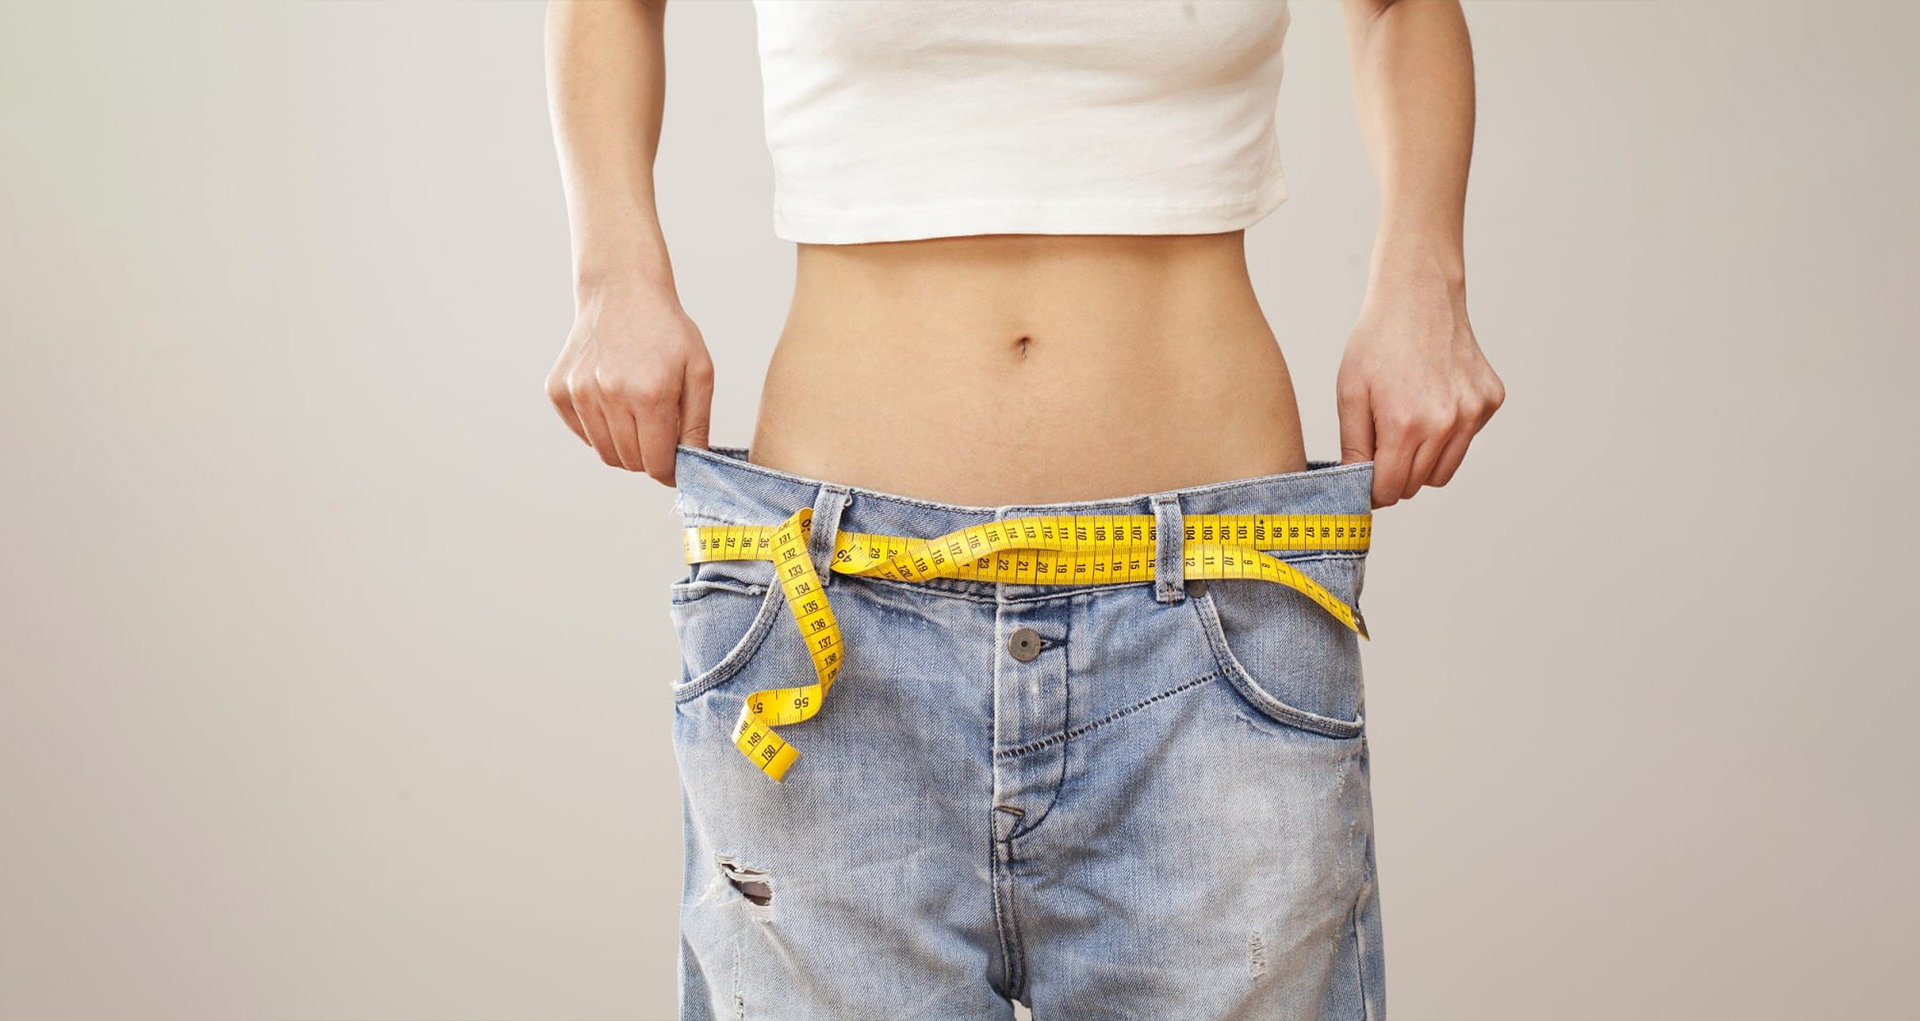 Garcinia Cambogia Weight Loss Results: What’s the Verdict?